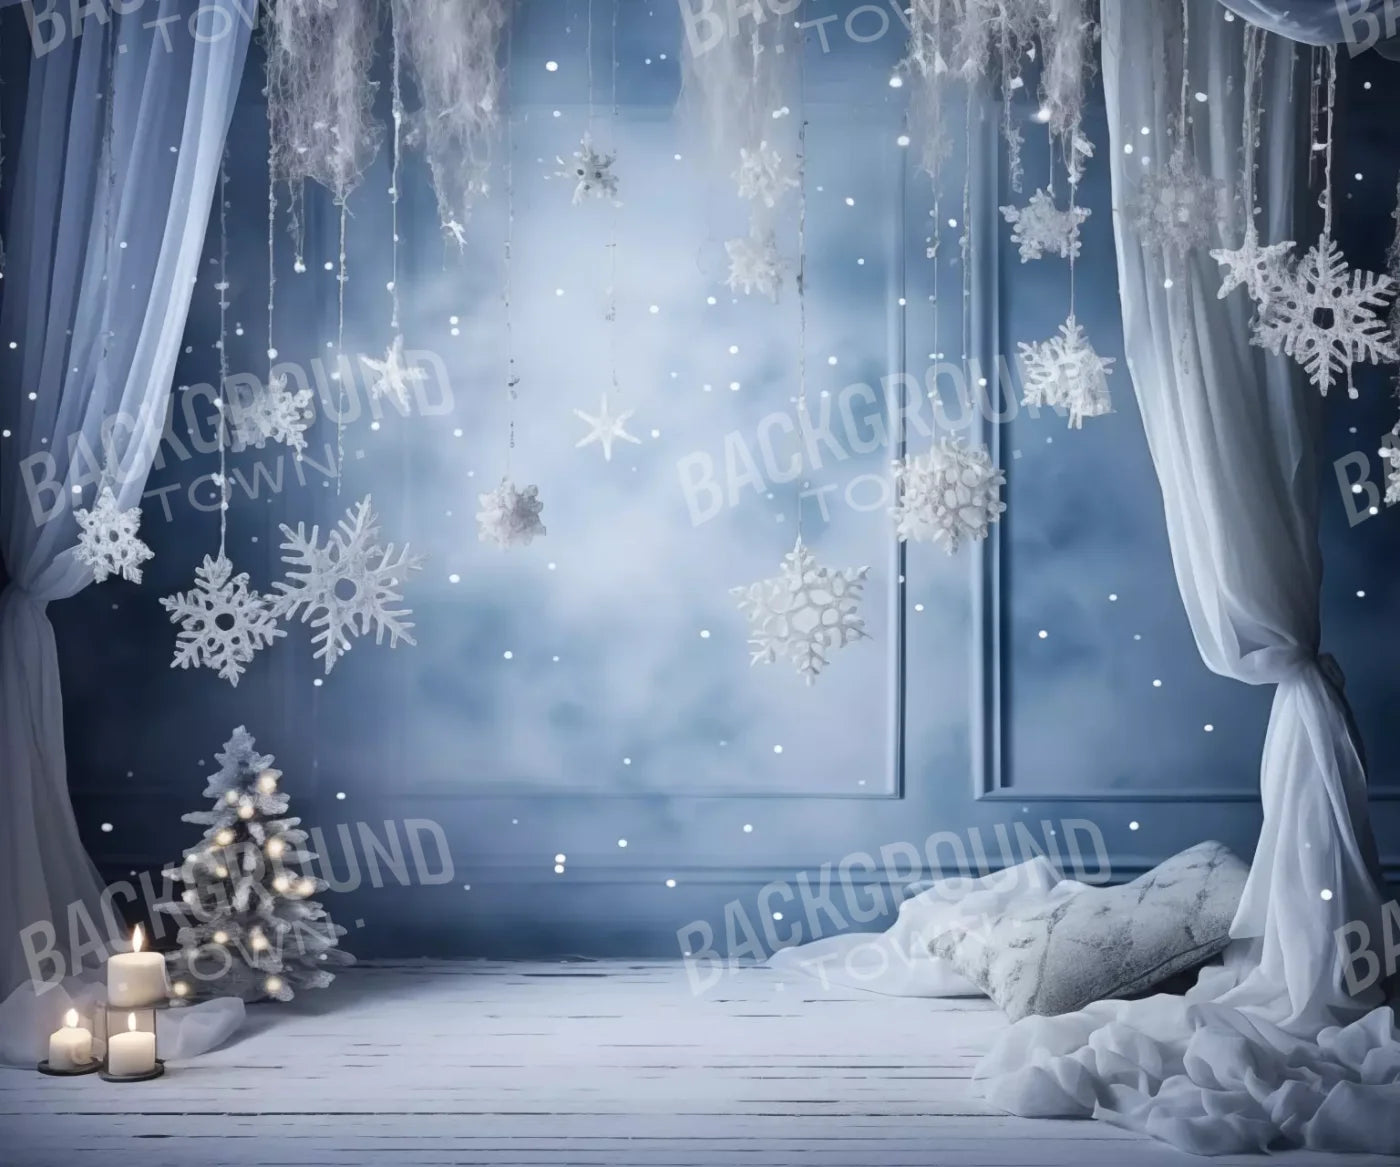 Blue And White Christmas 12X10 Ultracloth ( 144 X 120 Inch ) Backdrop